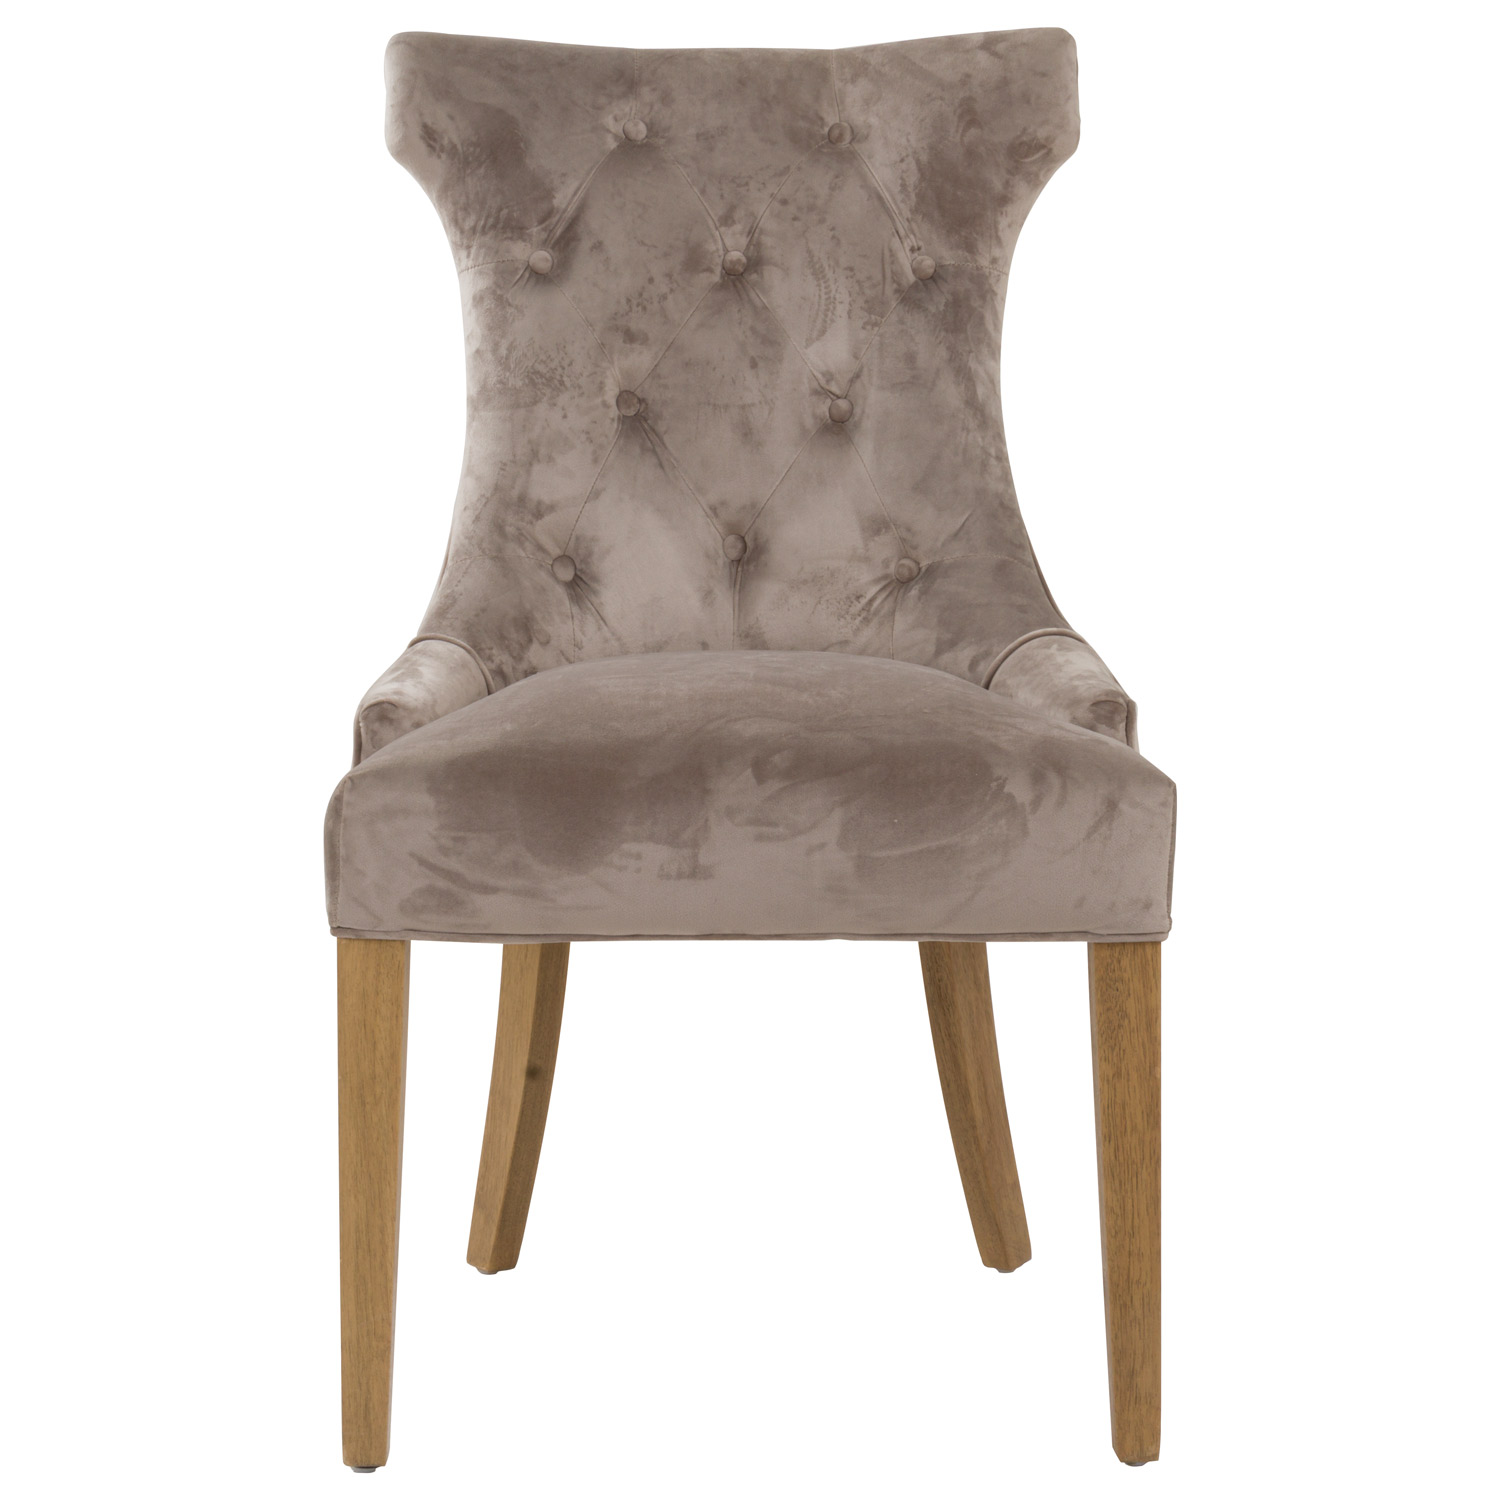 Chelsea High Wing Ring Backed Dining Chair - Image 2